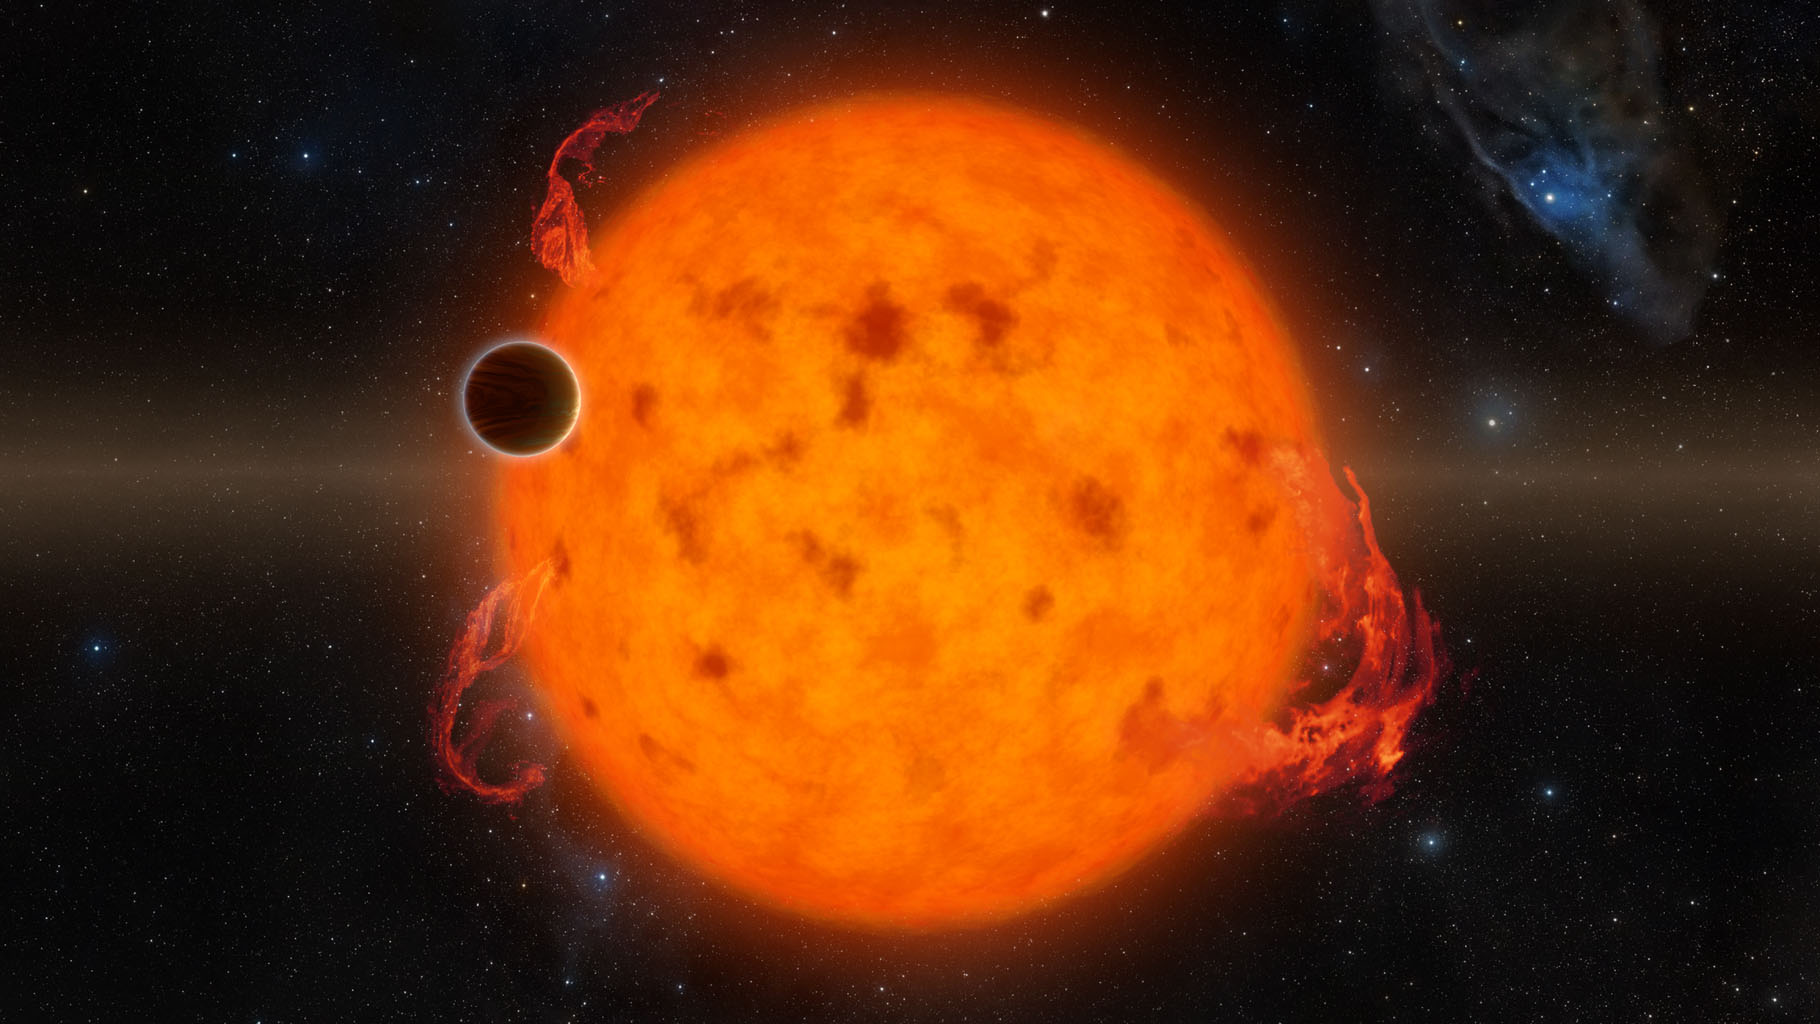 K2-33b, shown in this illustration, is one of the youngest exoplanets detected to date using NASA's Kepler Space Telescope.